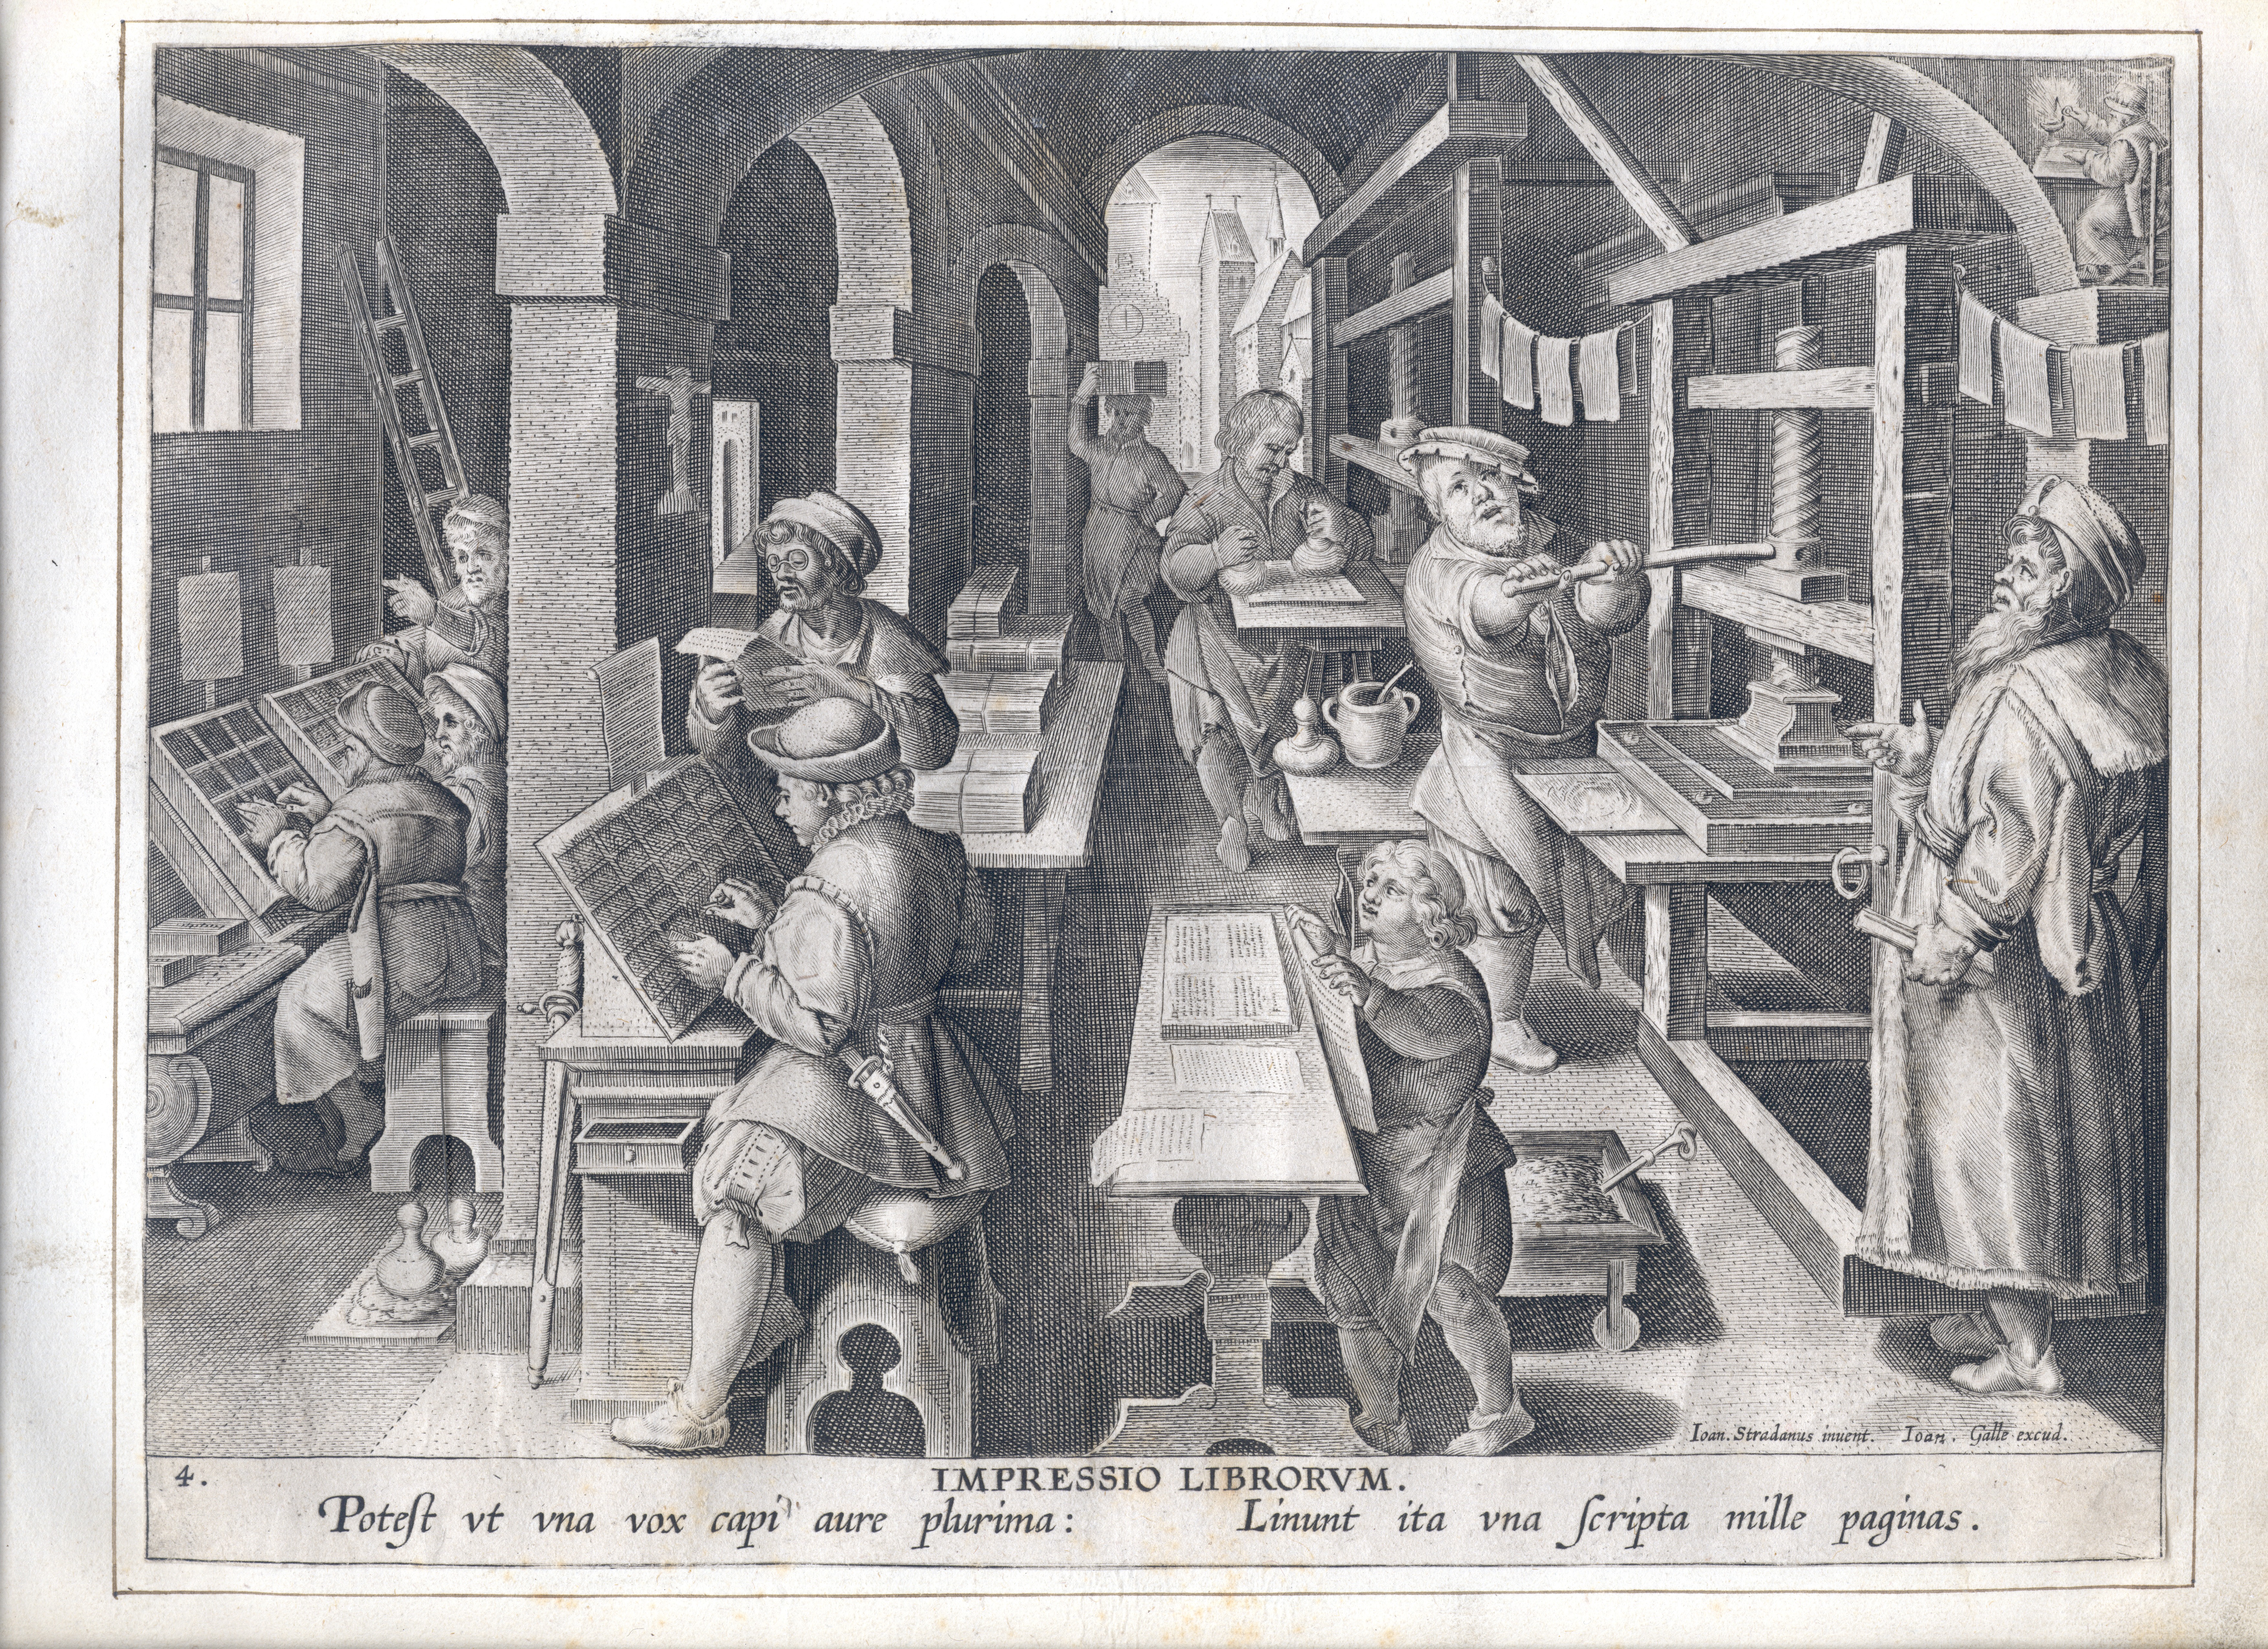 Image of early print shop